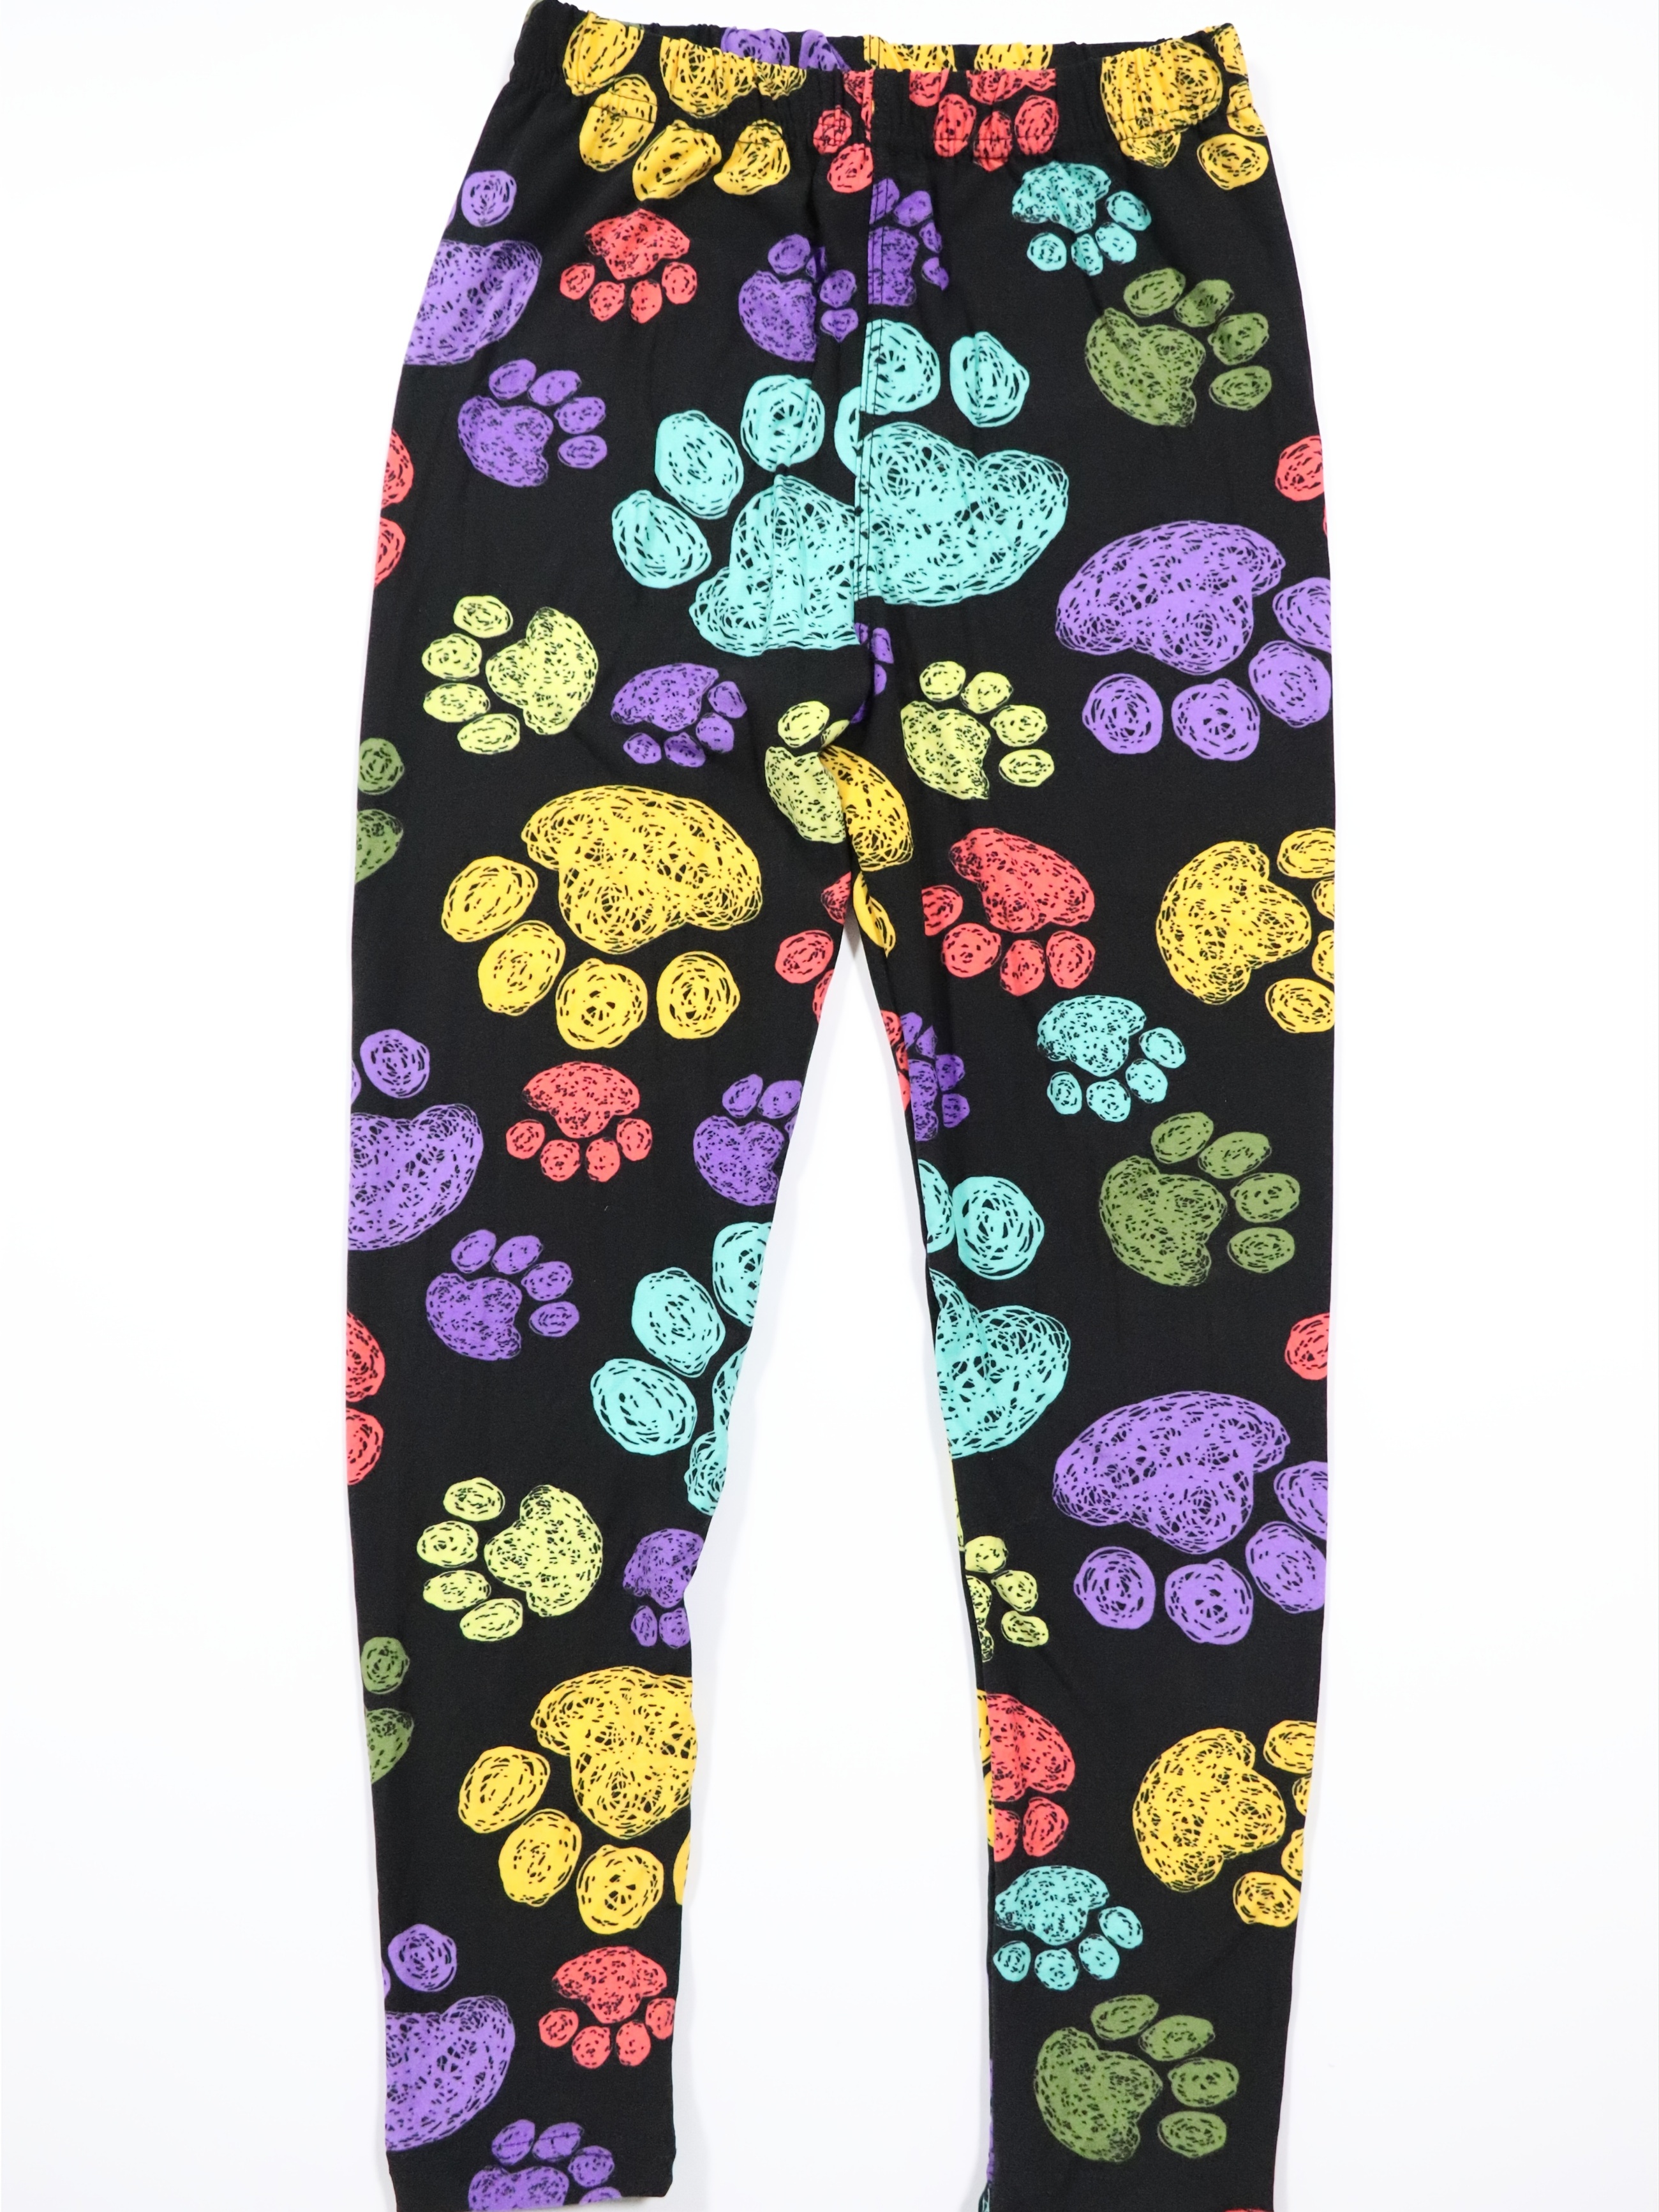 Girls Tight Fit Athletic Legging Pants Cute Claws Print High